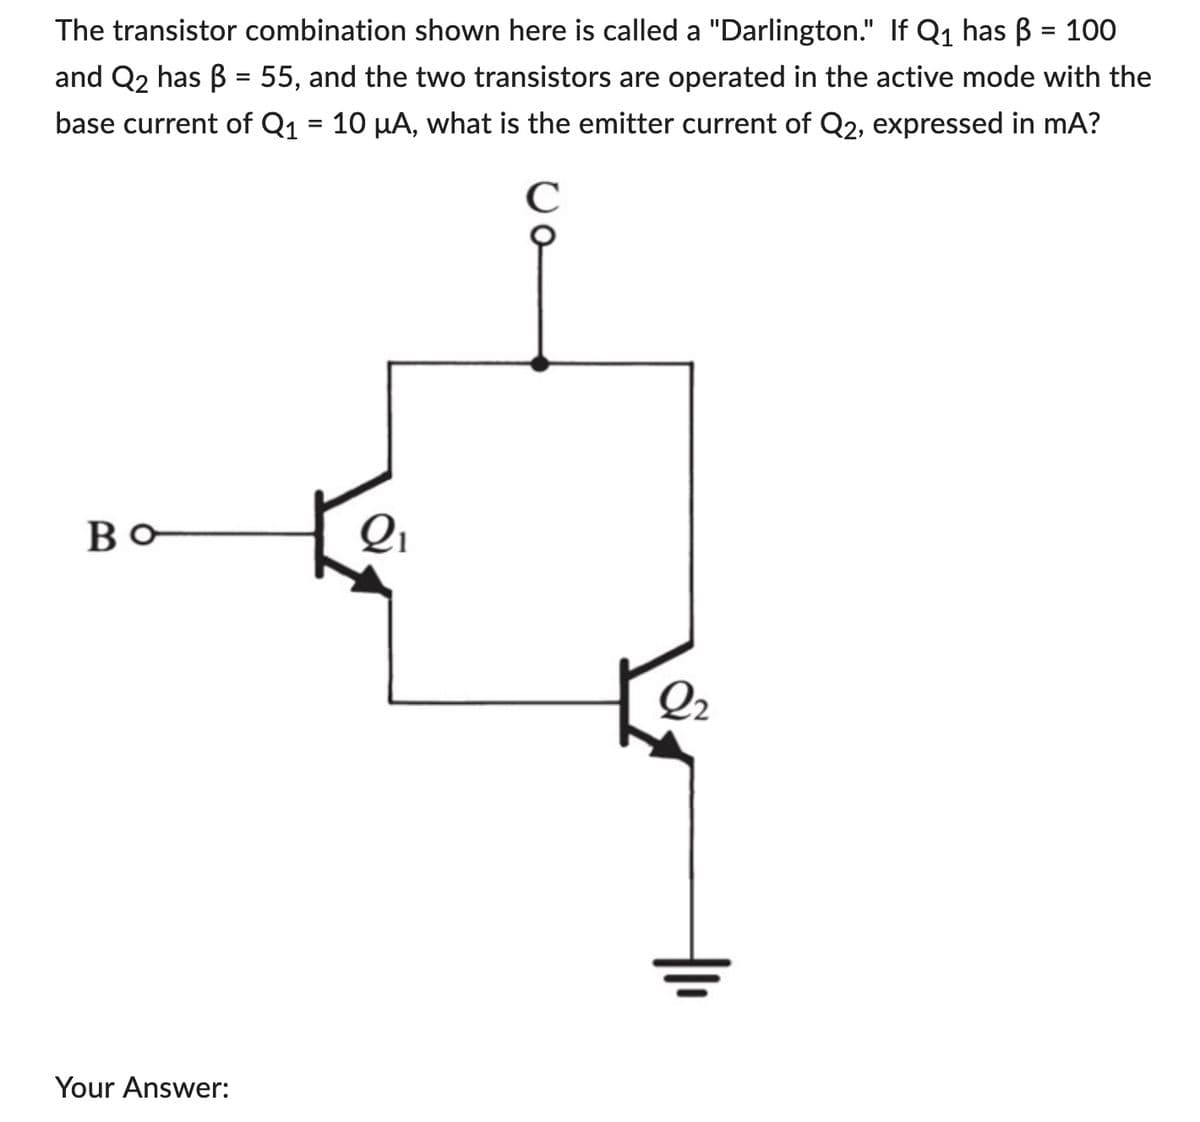 The transistor combination shown here is called a "Darlington." If Q₁ has ß = 100
and Q2 has B = 55, and the two transistors are operated in the active mode with the
base current of Q₁ = 10 µA, what is the emitter current of Q2, expressed in mA?
во
Your Answer:
2₁
U o
C
2₂